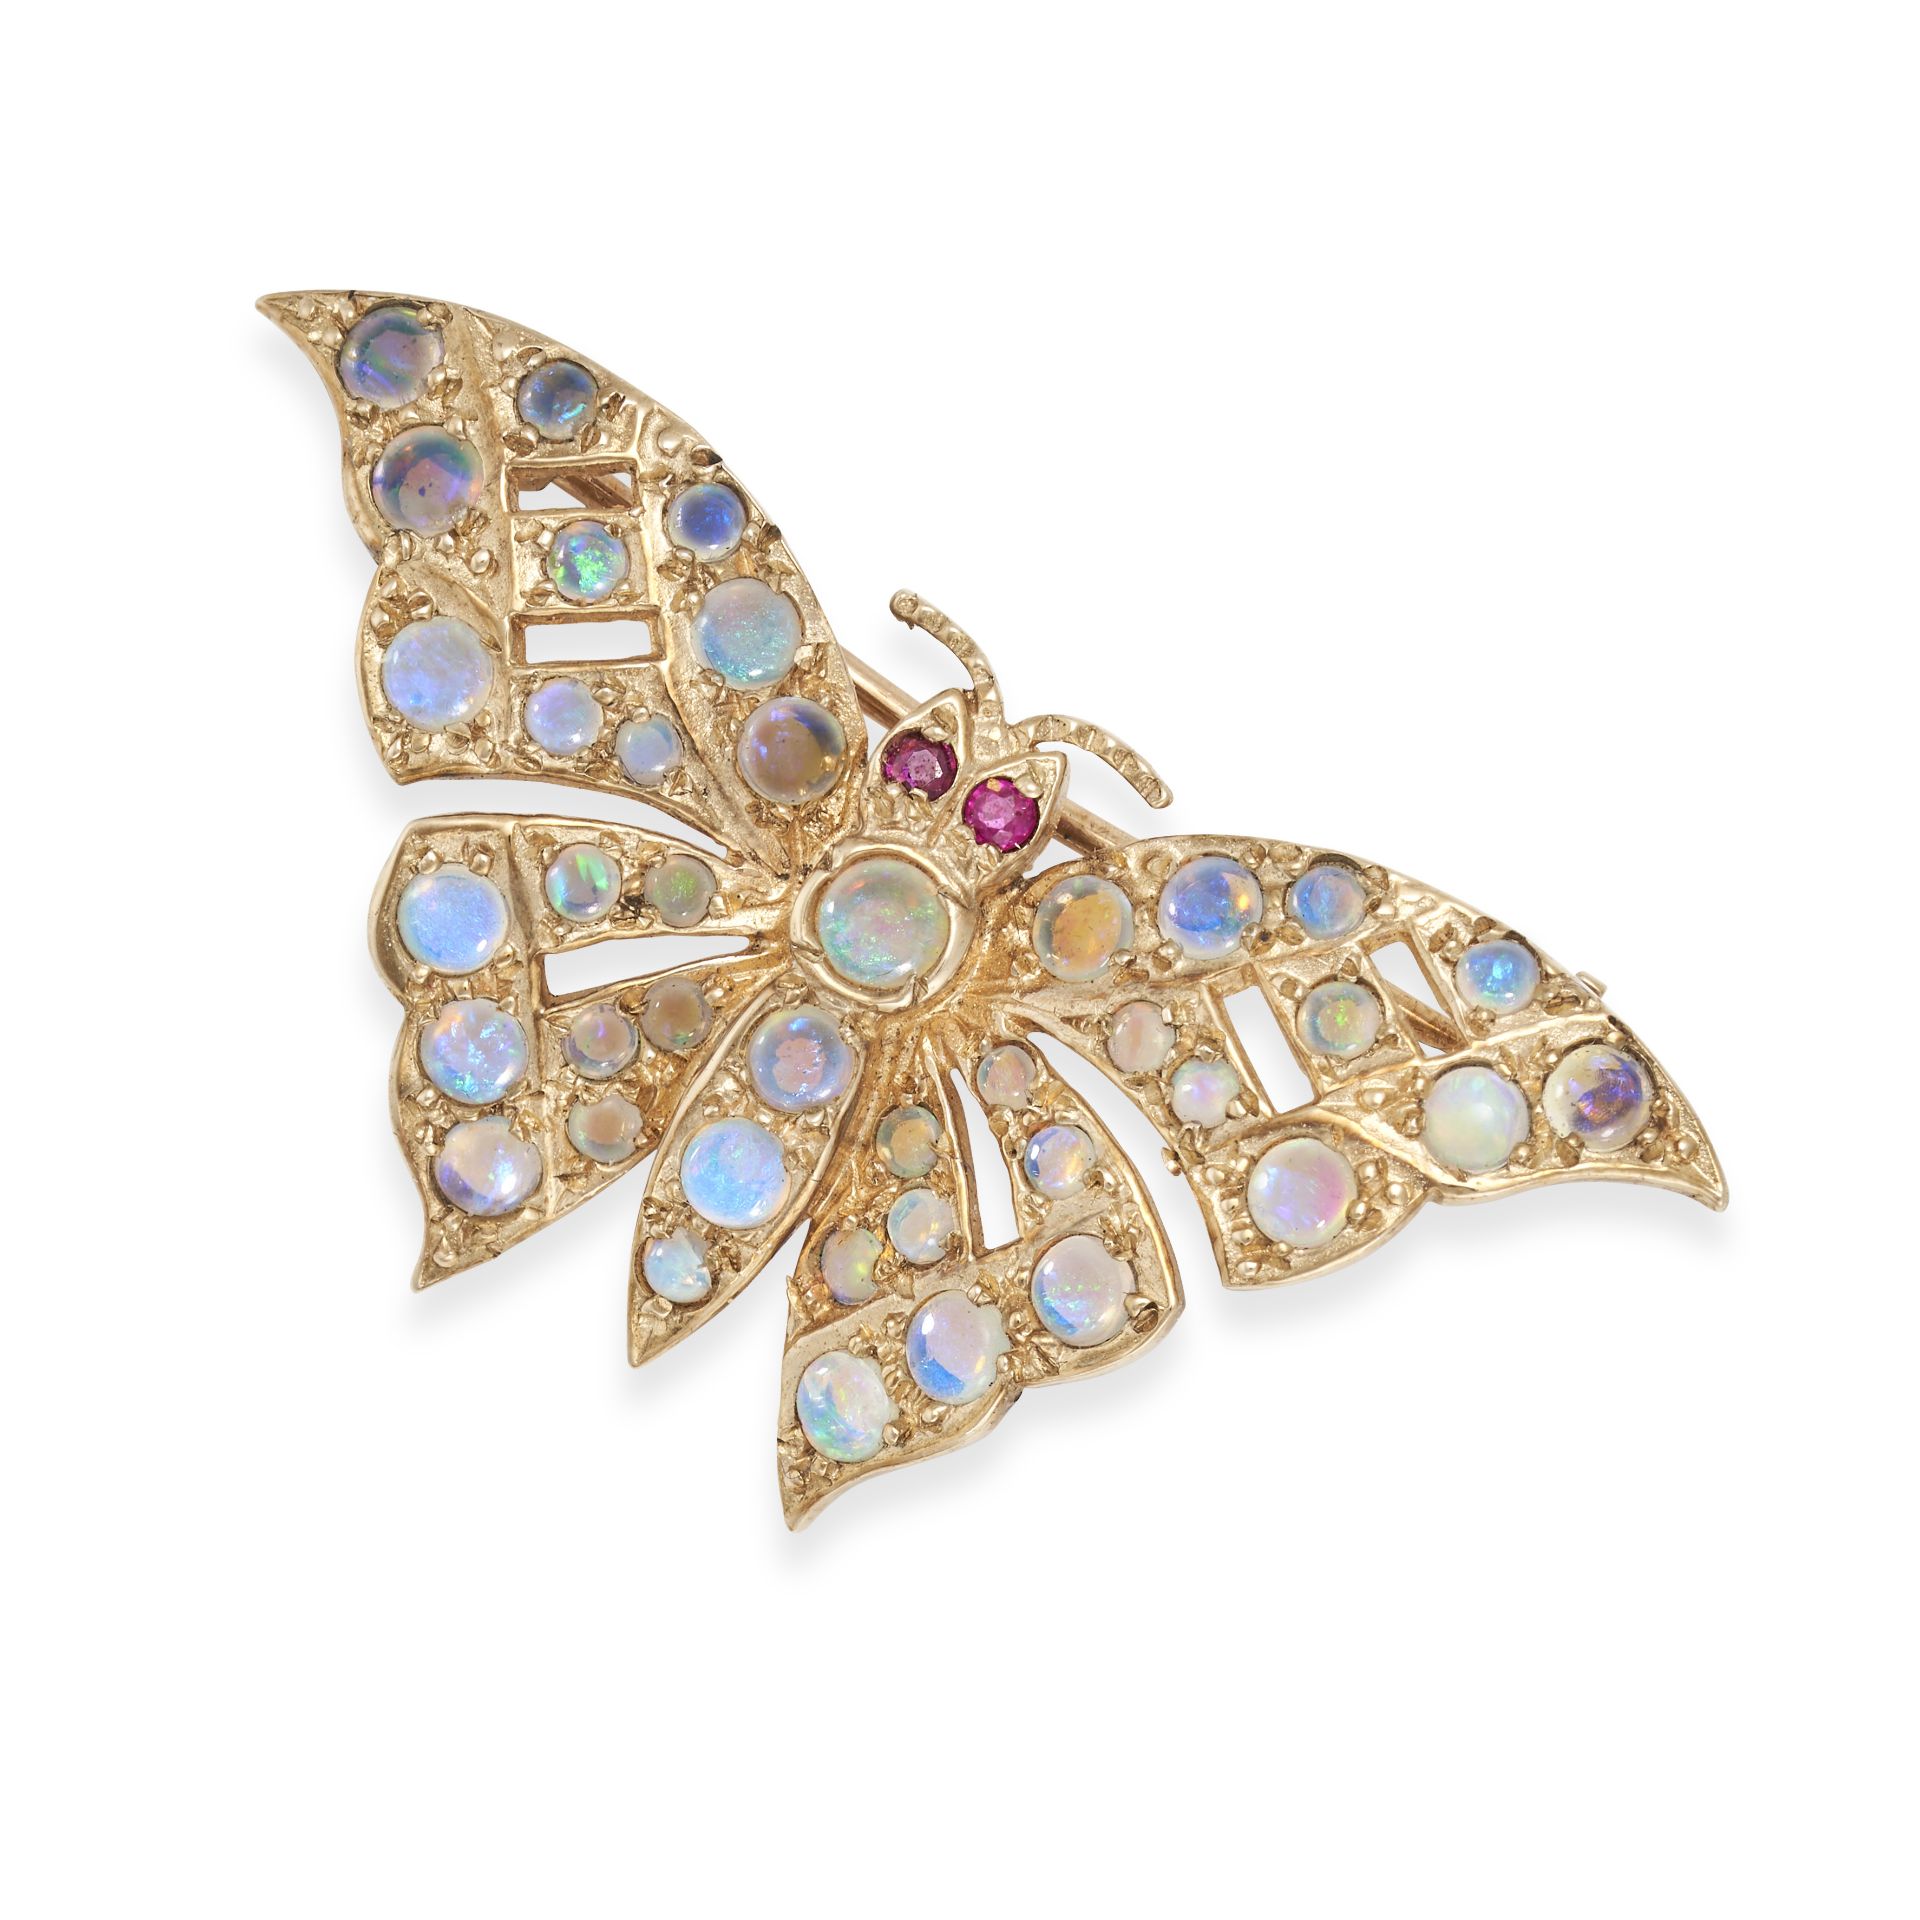 NO RESERVE - AN OPAL AND RUBY BUTTERFLY BROOCH in 9ct yellow gold, set throughout with cabochon o...